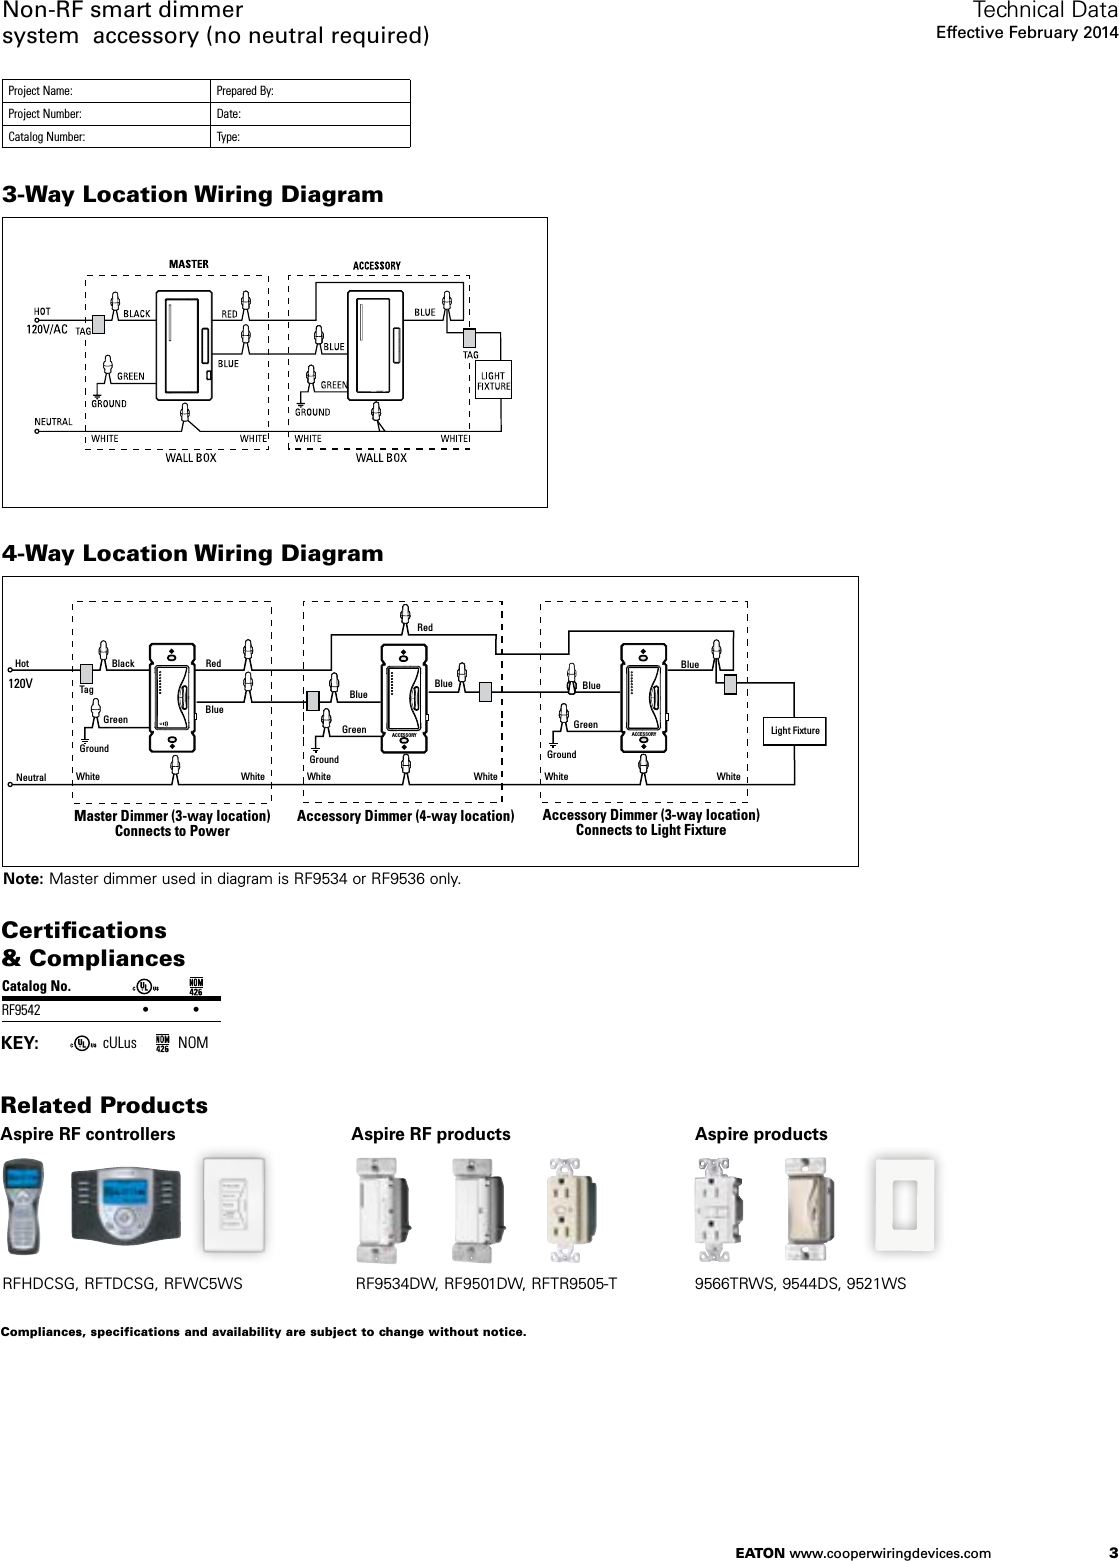 Page 3 of 4 - Z-Wave B004Fw2Ndq Eaton Aspire Non-Rf Rf9542 Smart Dimmer System Accessory Spec Sheet User Manual